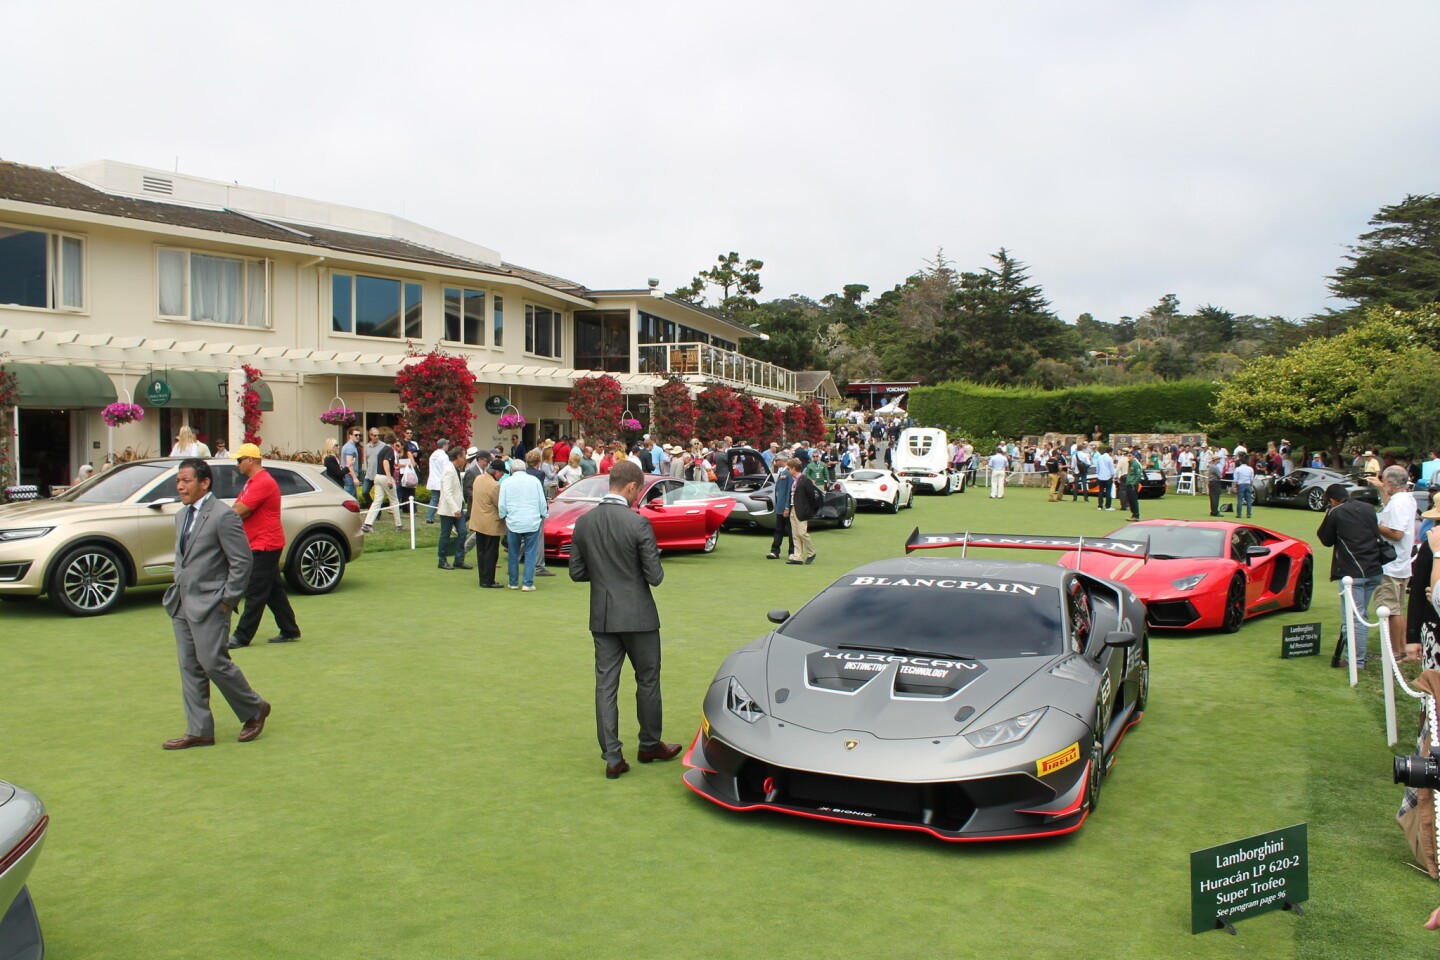 The Lamborghini Huracan Super Trofeo and others on the Concept Lawn at the 2014 Pebble Beach Concours d'Elegance.